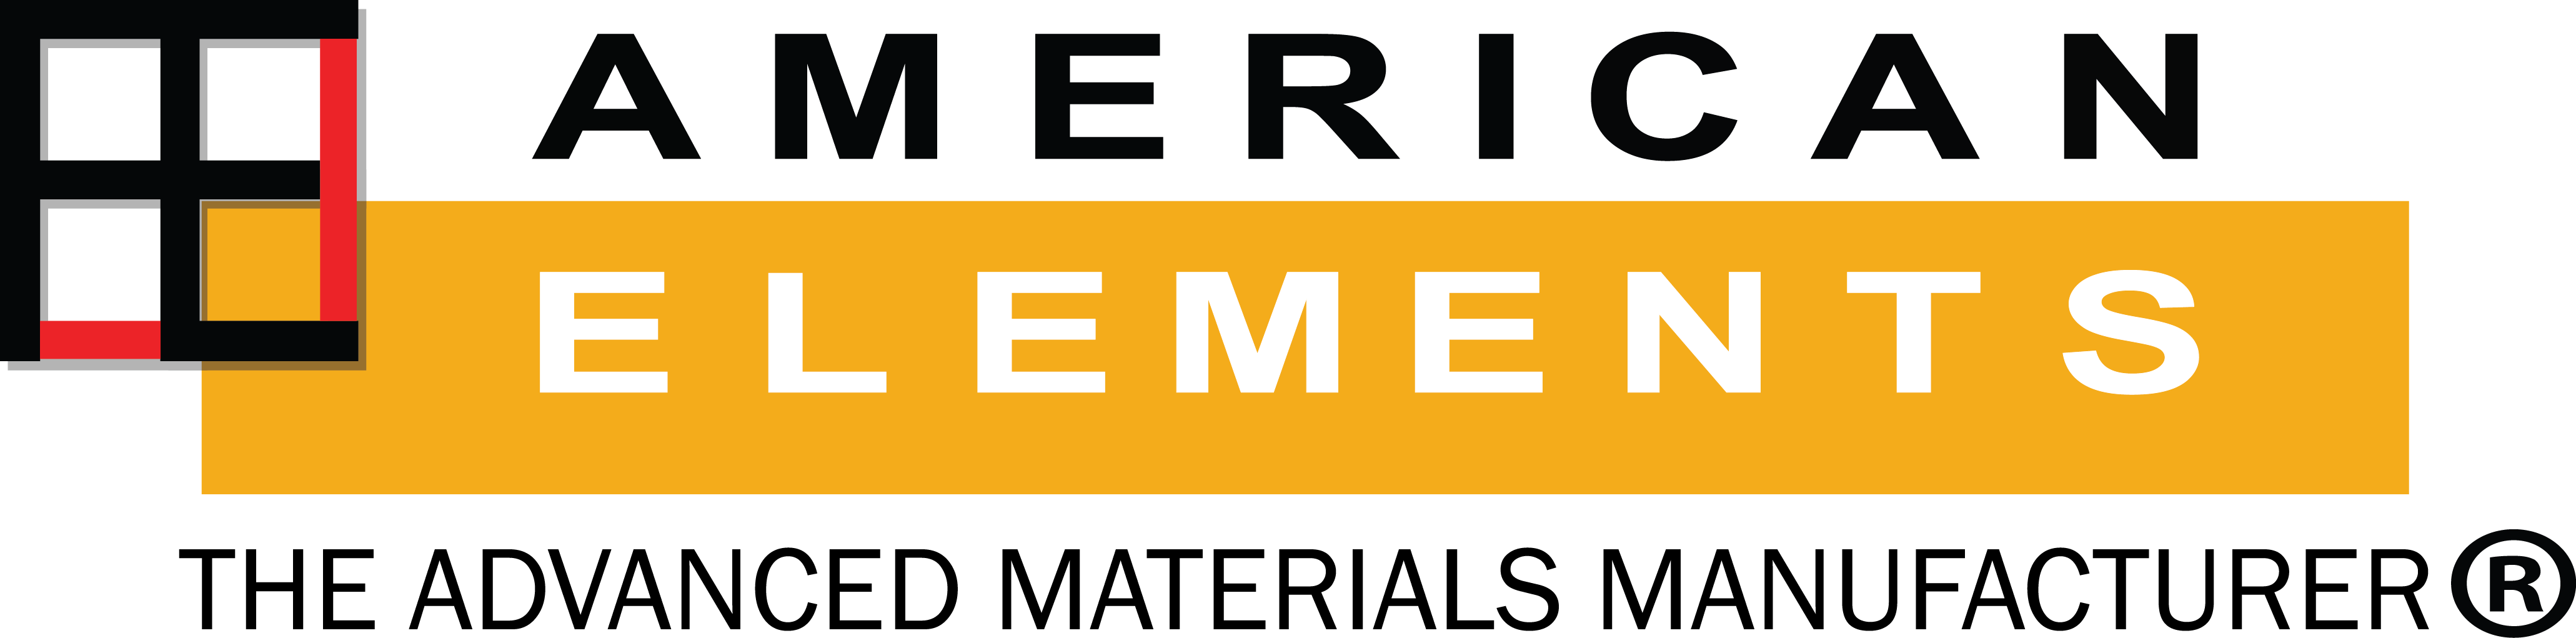 American Elements, global manufacturer of high purity nanopowders, composites, functionalized materials for nanosensors, nanoelectronics & nanobiotechnology